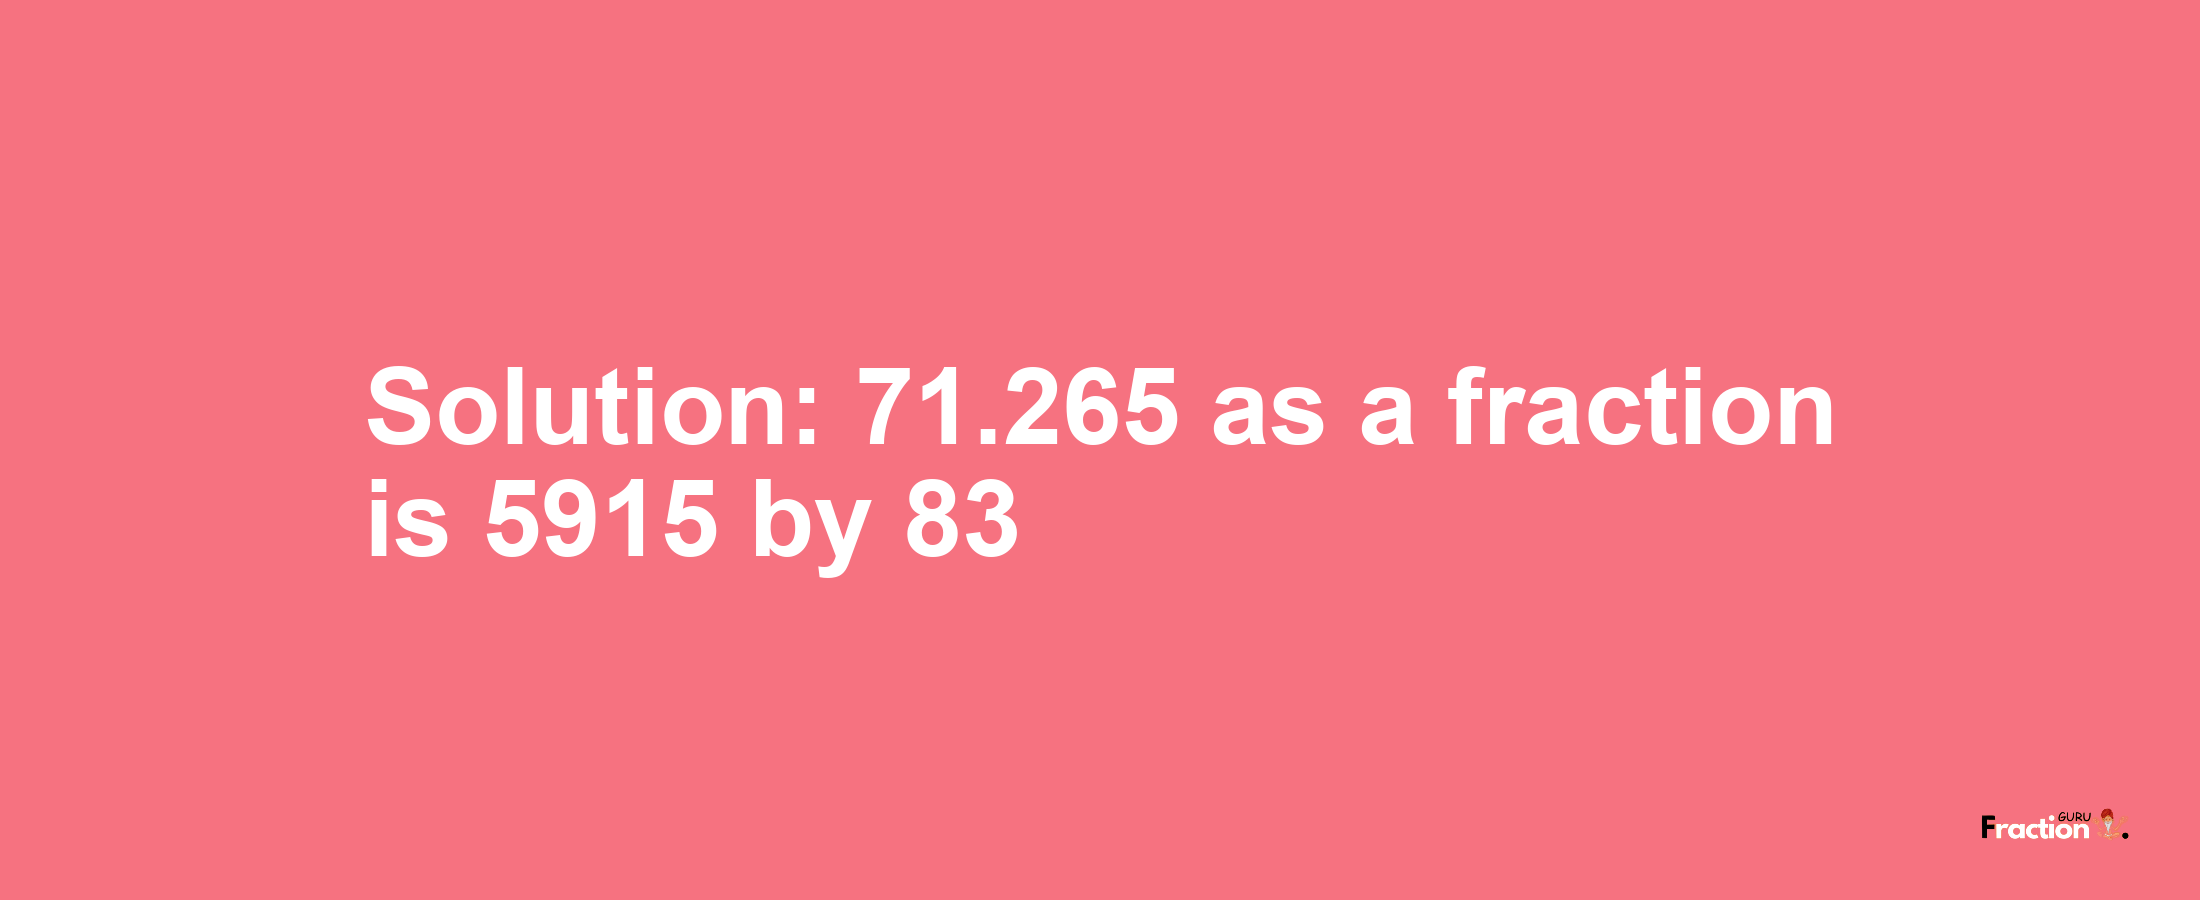 Solution:71.265 as a fraction is 5915/83